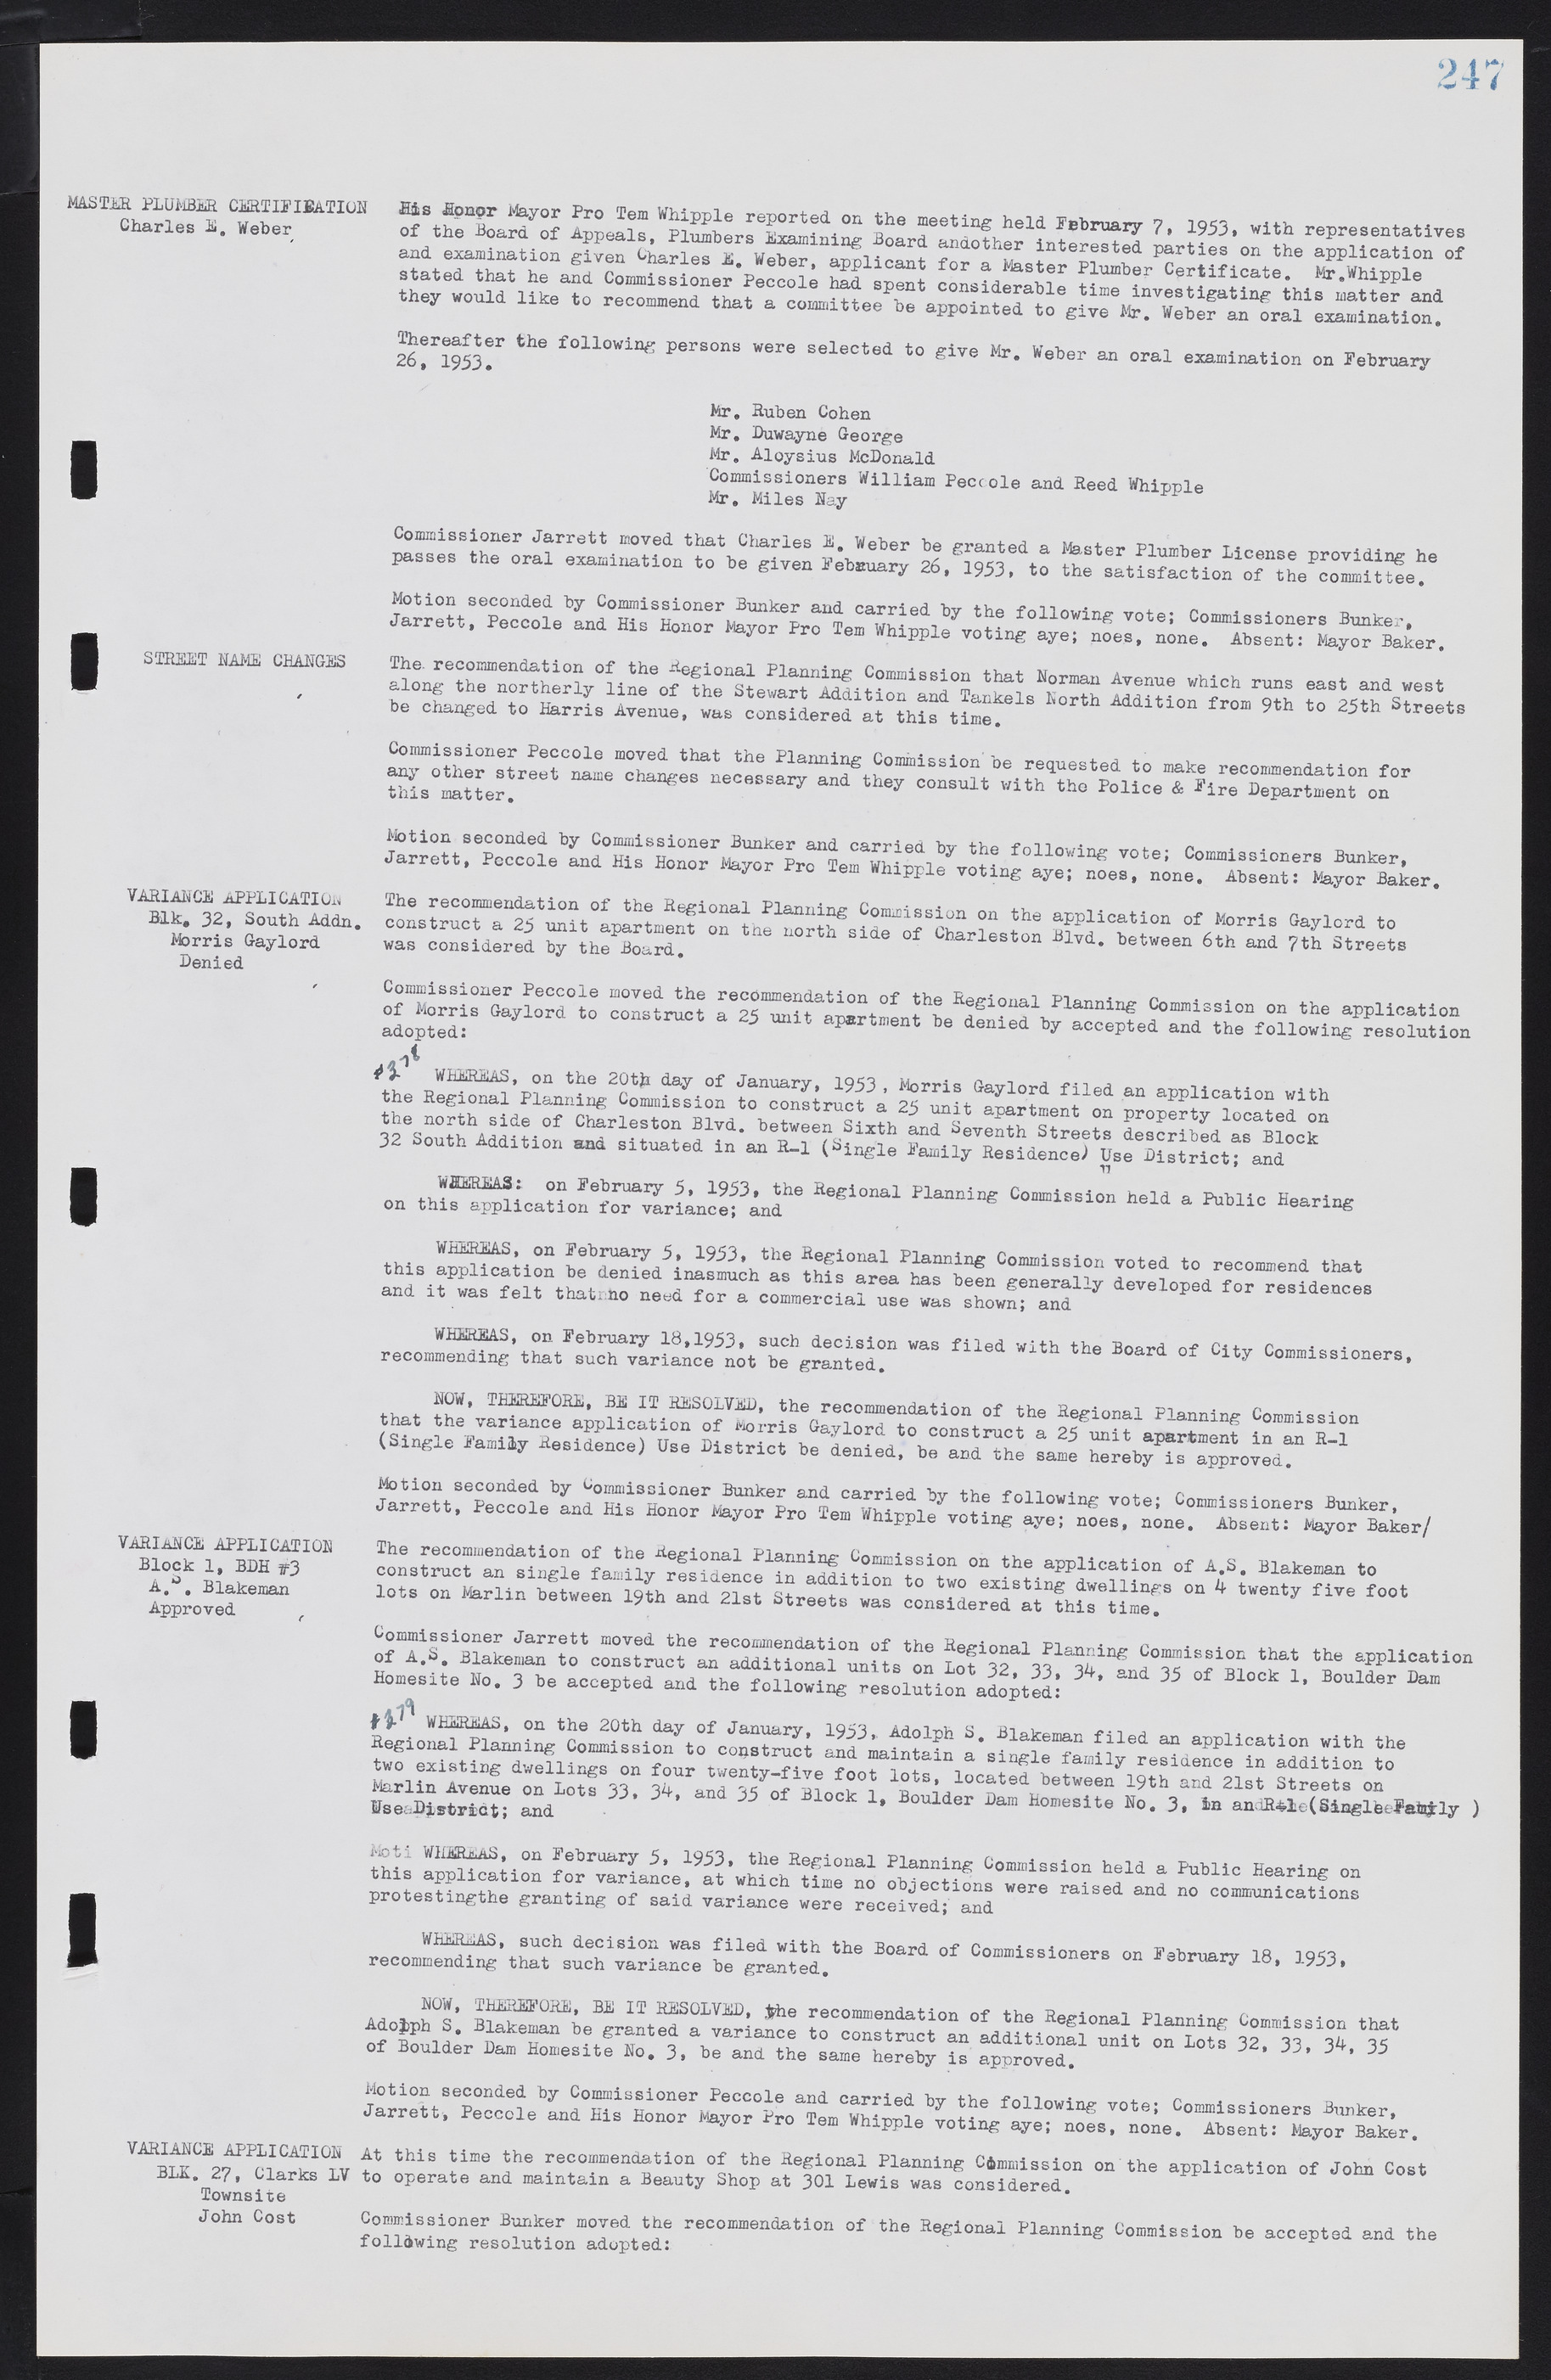 Las Vegas City Commission Minutes, May 26, 1952 to February 17, 1954, lvc000008-263